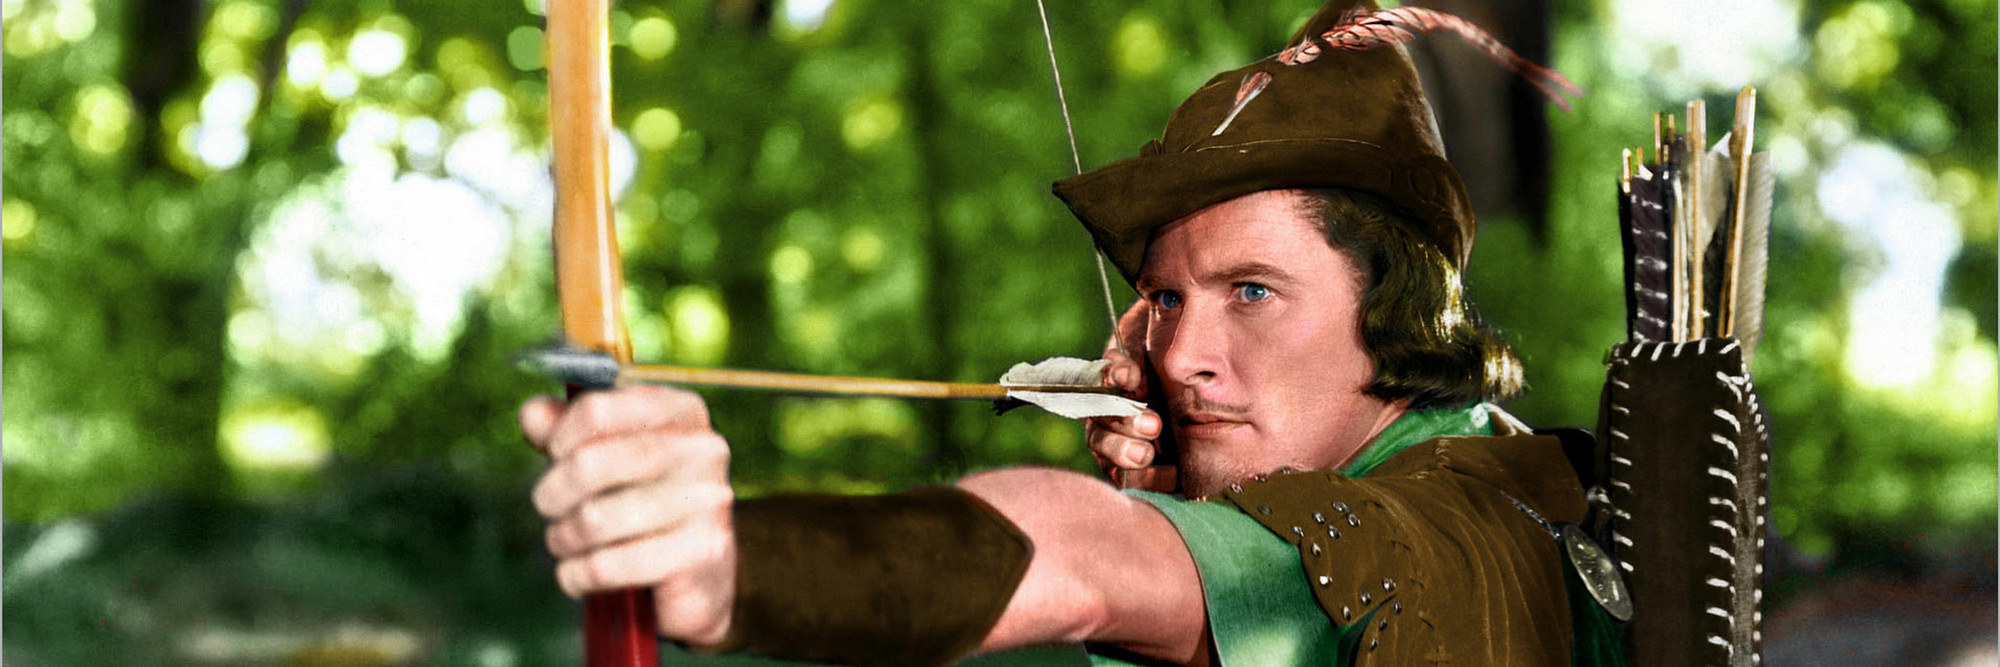 The Adventures of Robin Hood. 1938. USA. Directed by Michael Curtiz. Courtesy Alamy